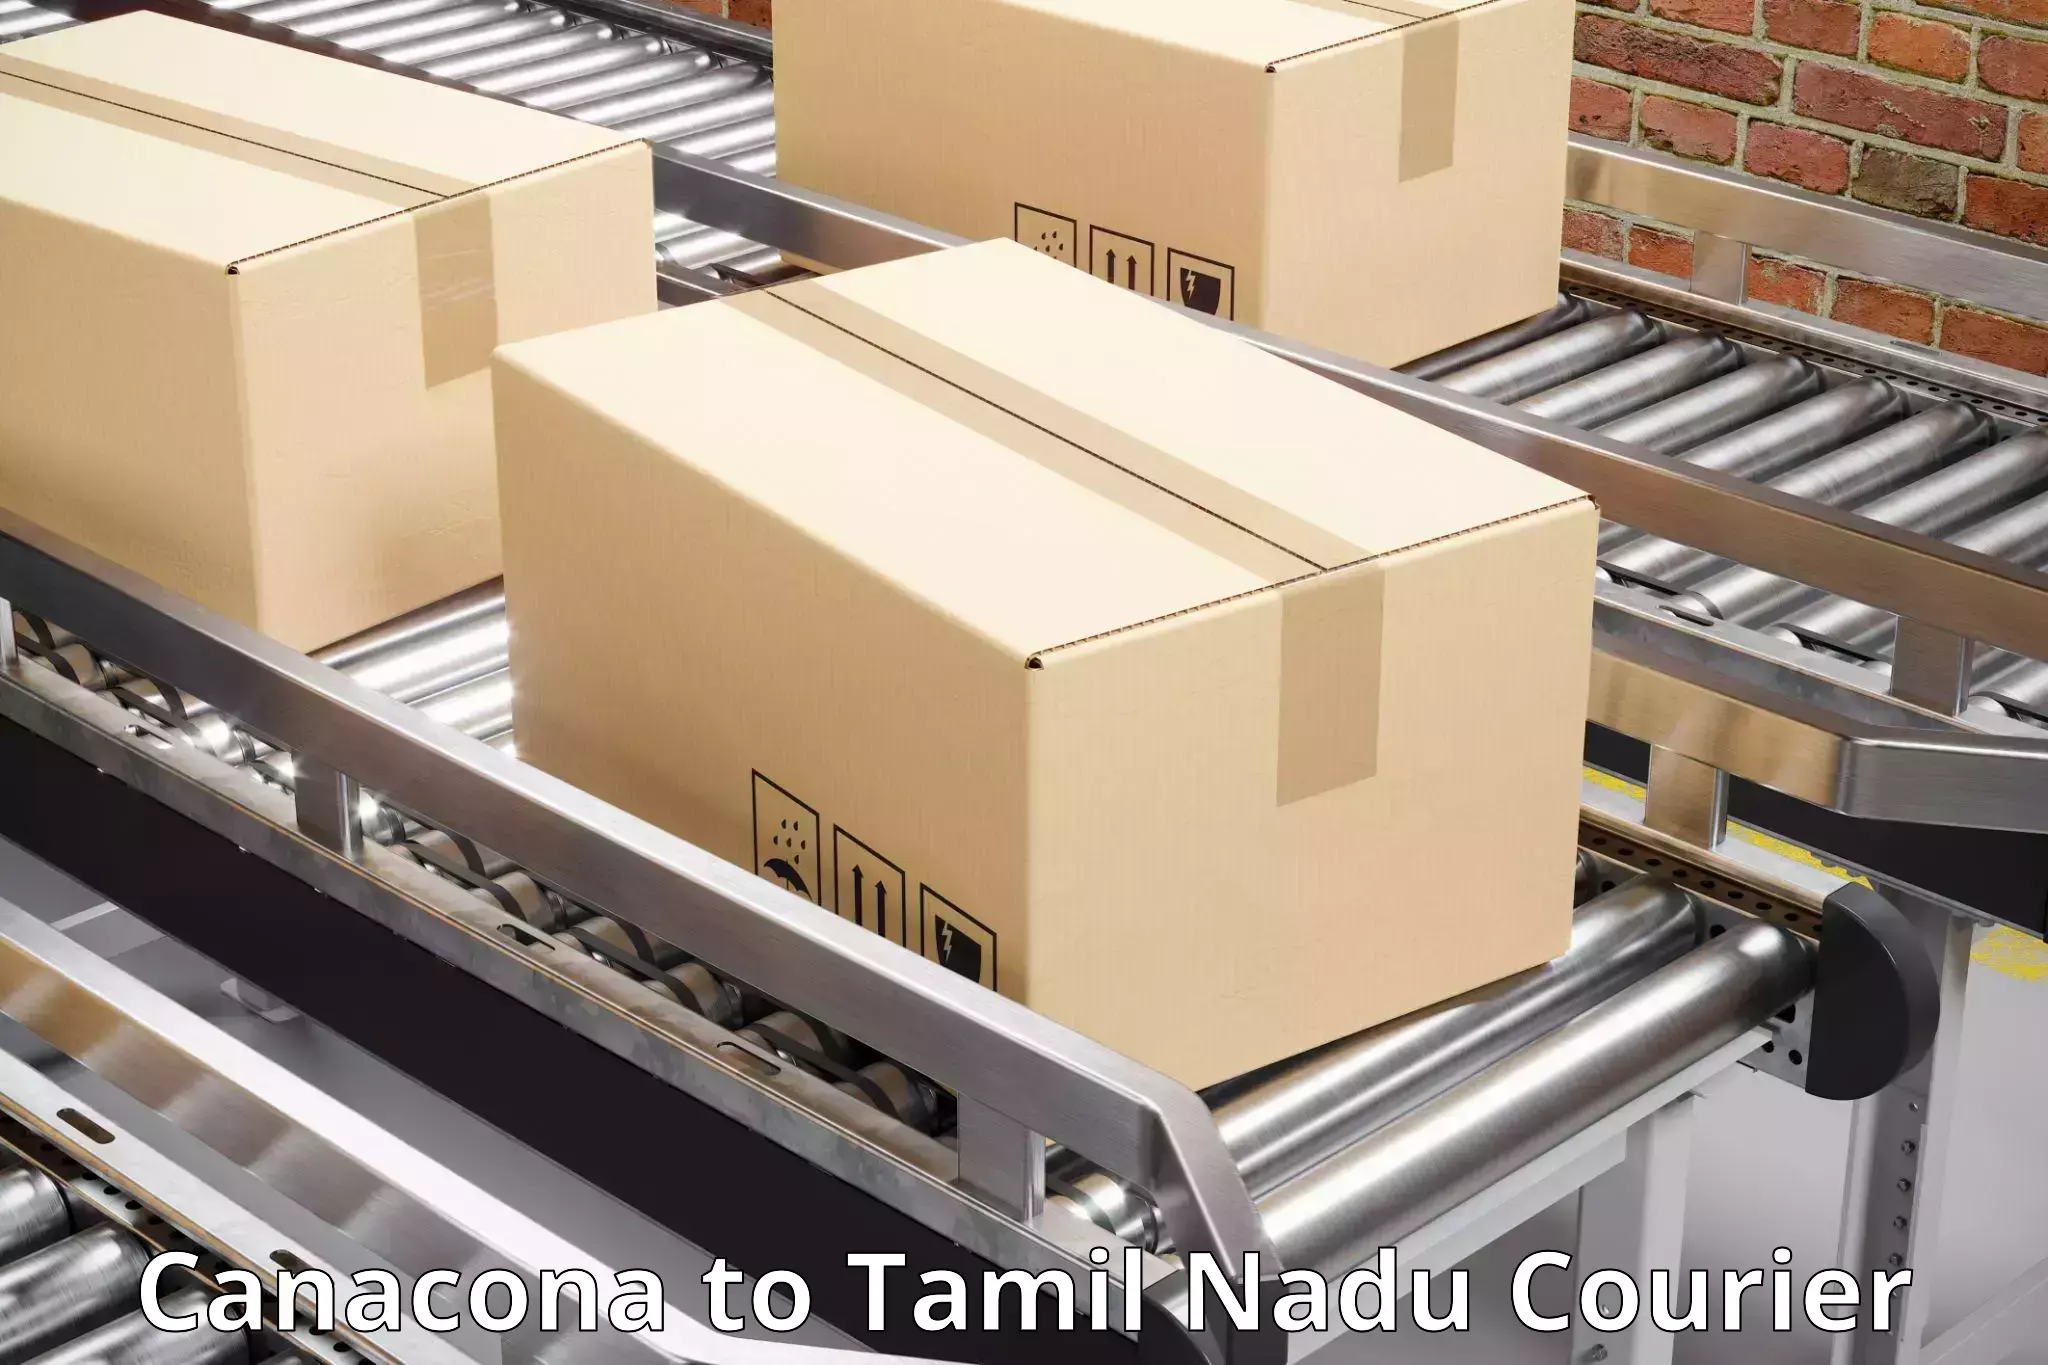 Modern parcel services Canacona to Thiruthuraipoondi